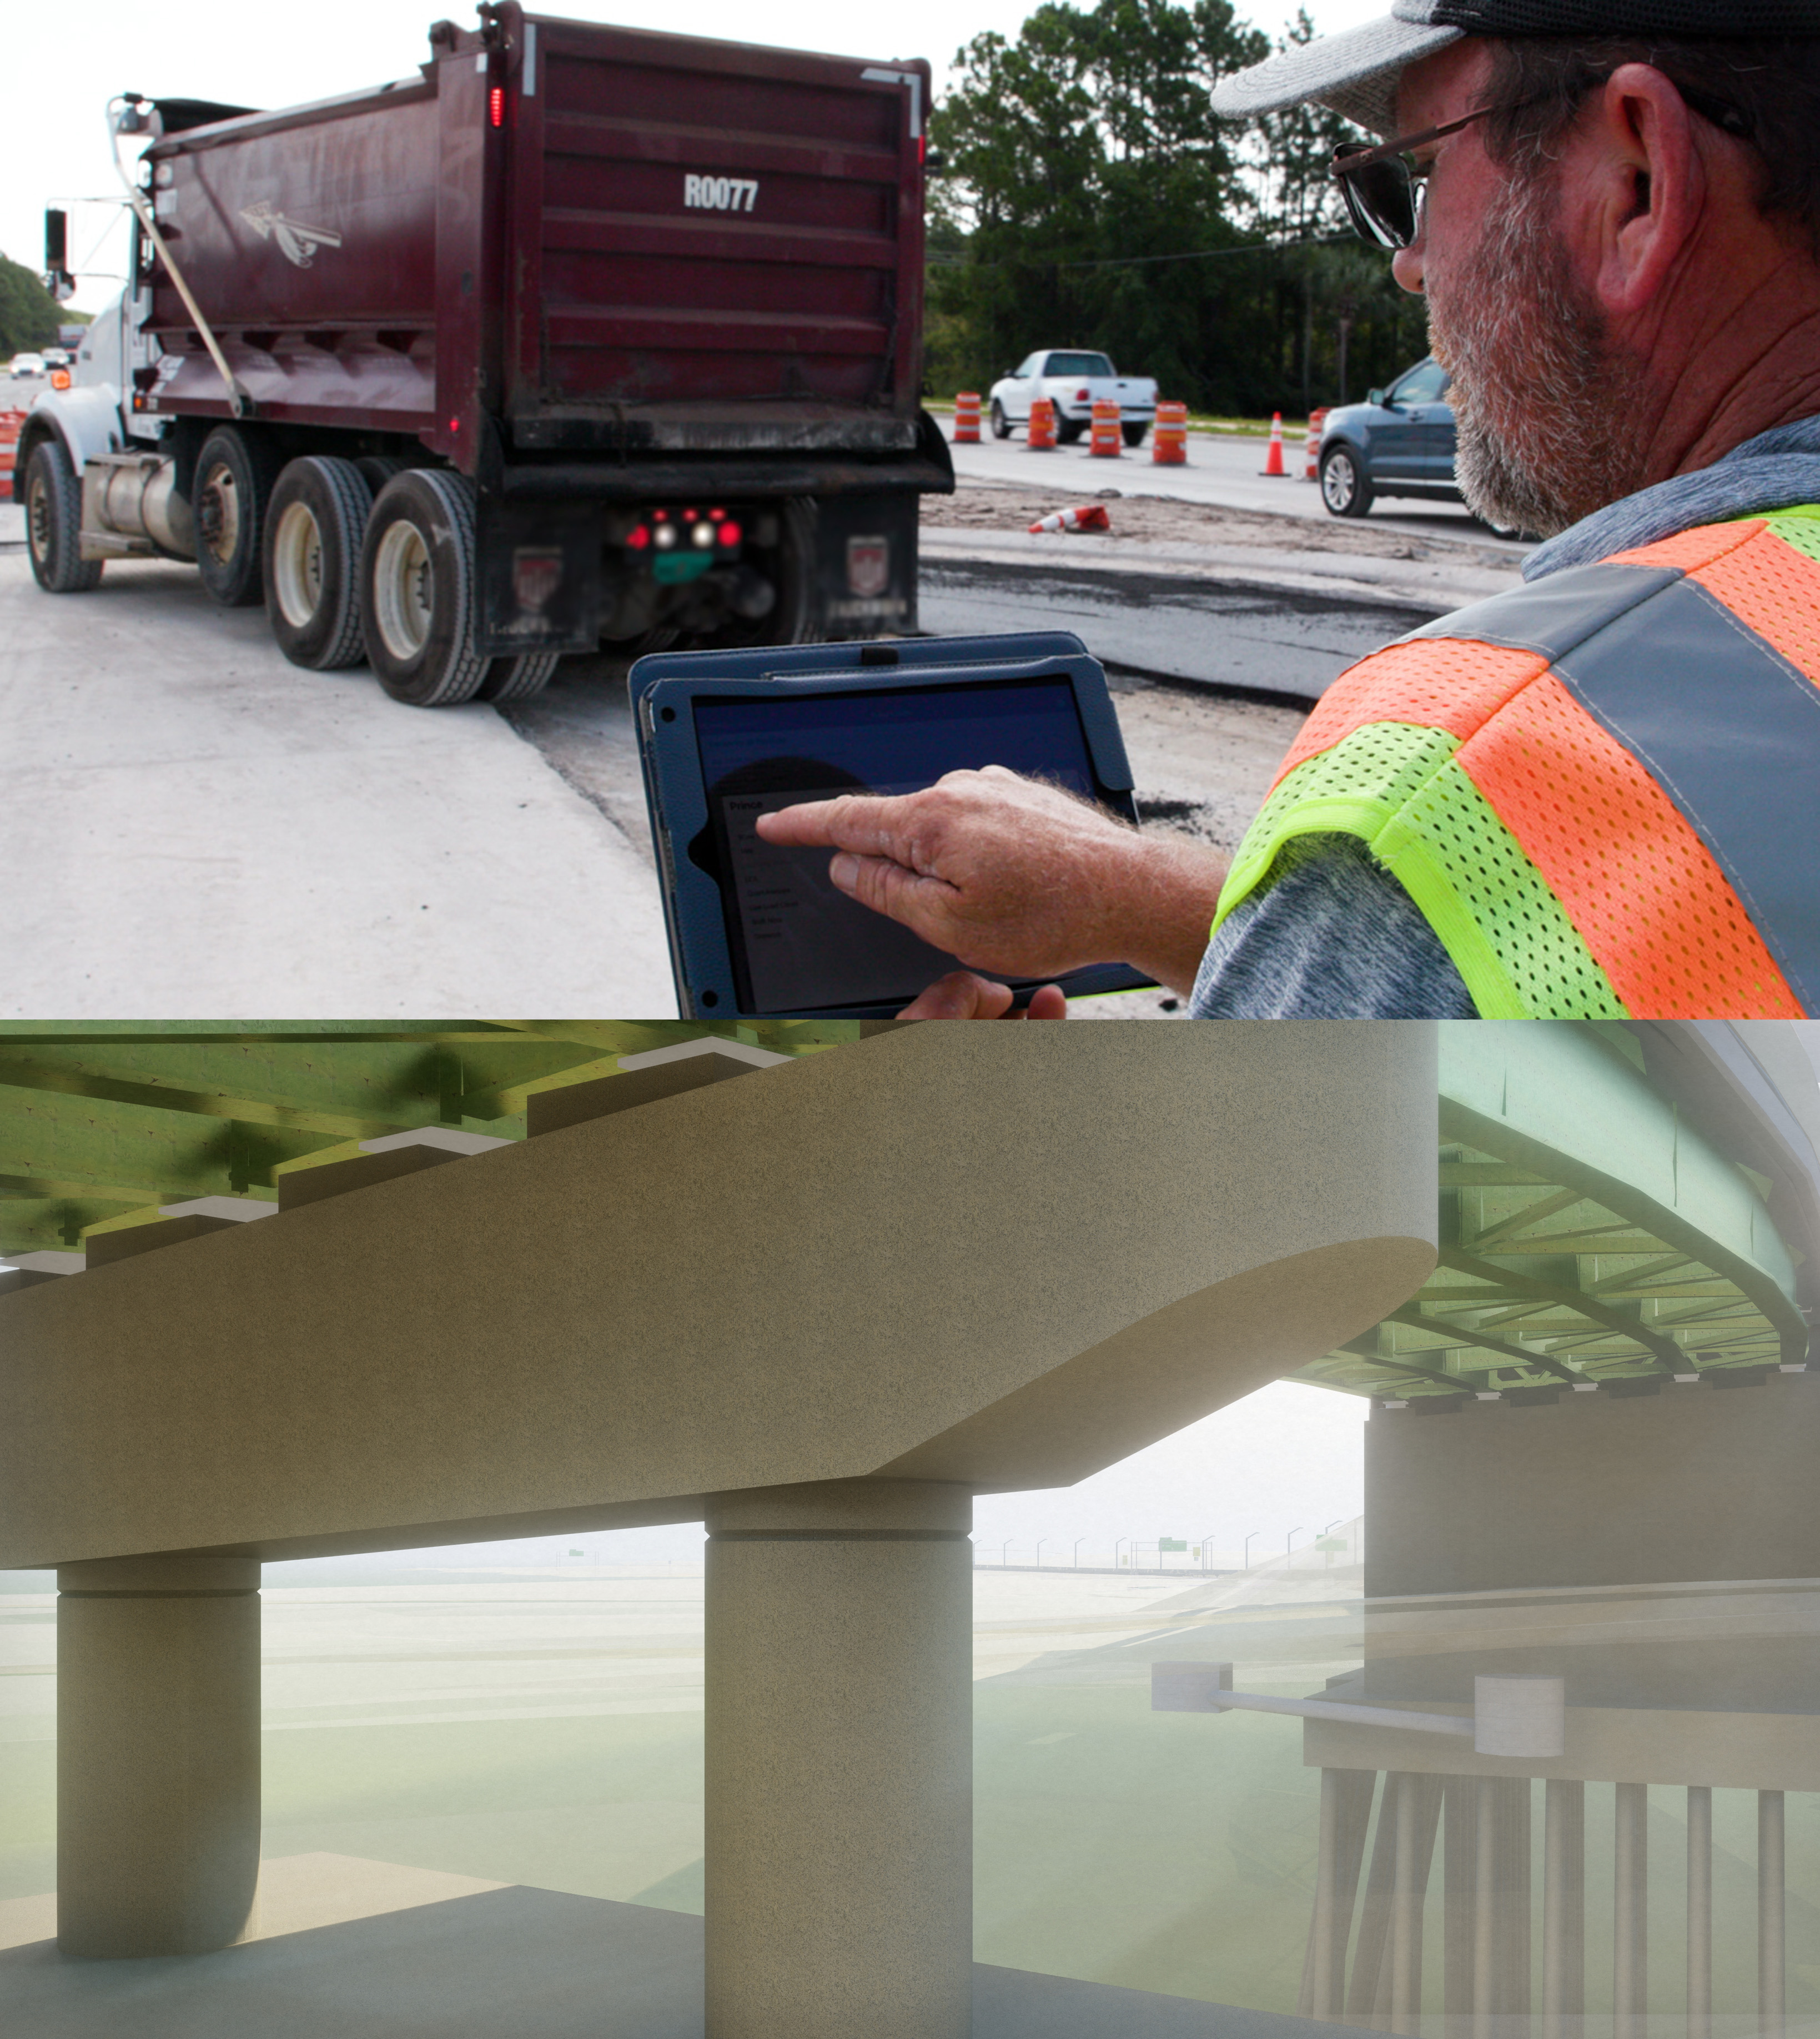 Two images stacked top to bottom. The top image is a construction worker working on a tablet while a dump truck approaches a worksite. The bottom image is a digital as-built of a bridge.